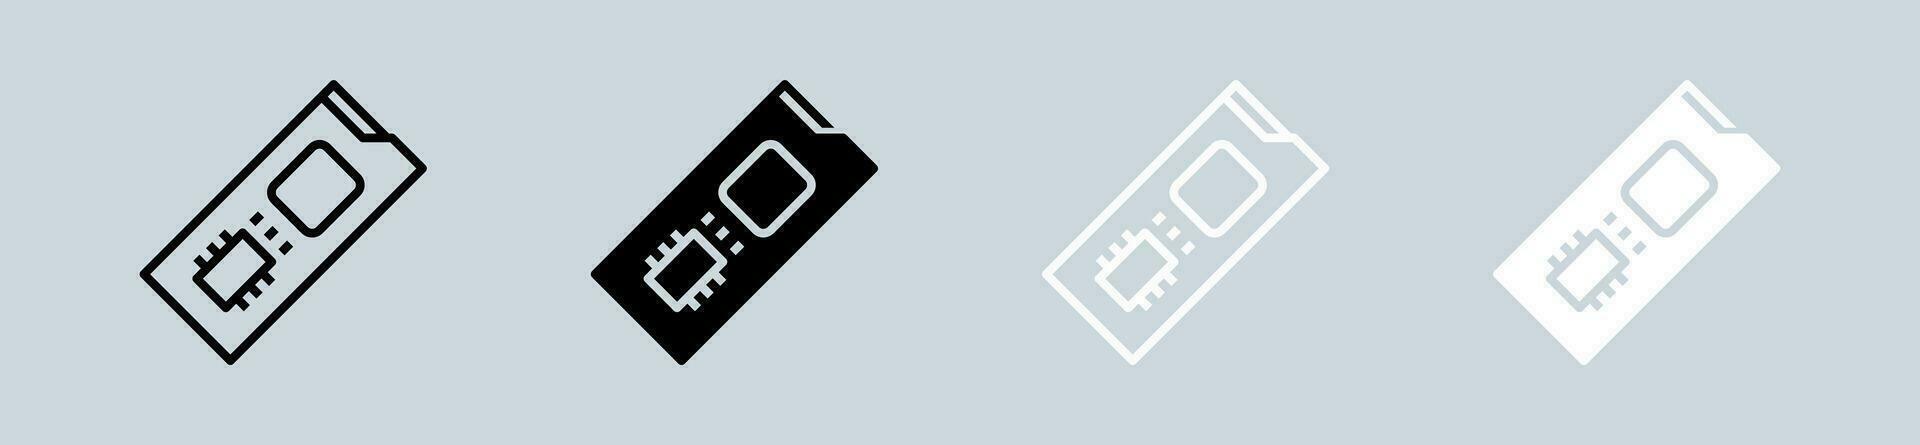 Ssd icon set in black and white. Drive signs vector illustration.